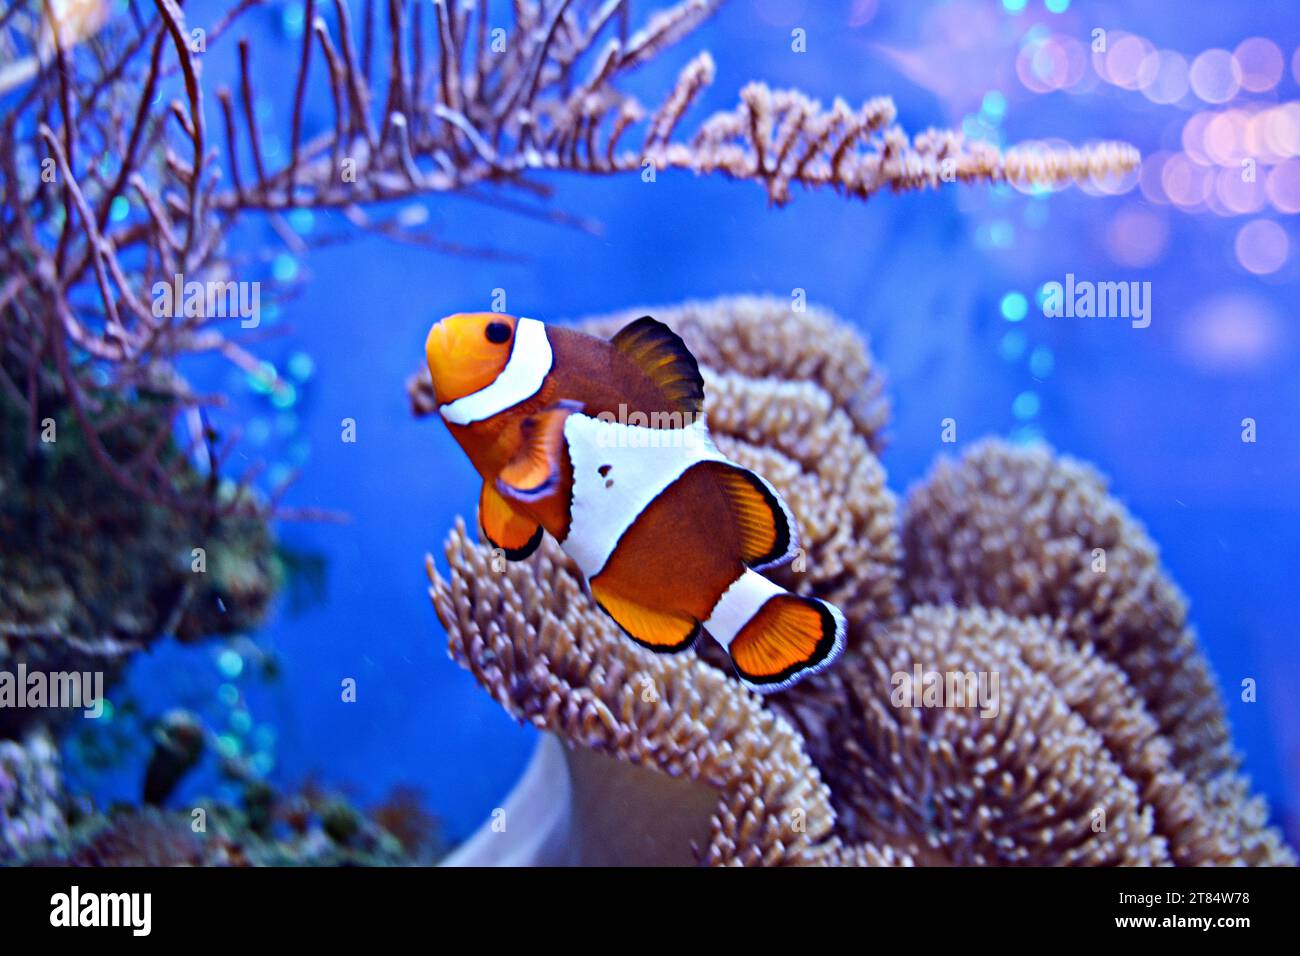 Clownfish, Amphiprioninae, in aquarium tank with reef as background. Stock Photo